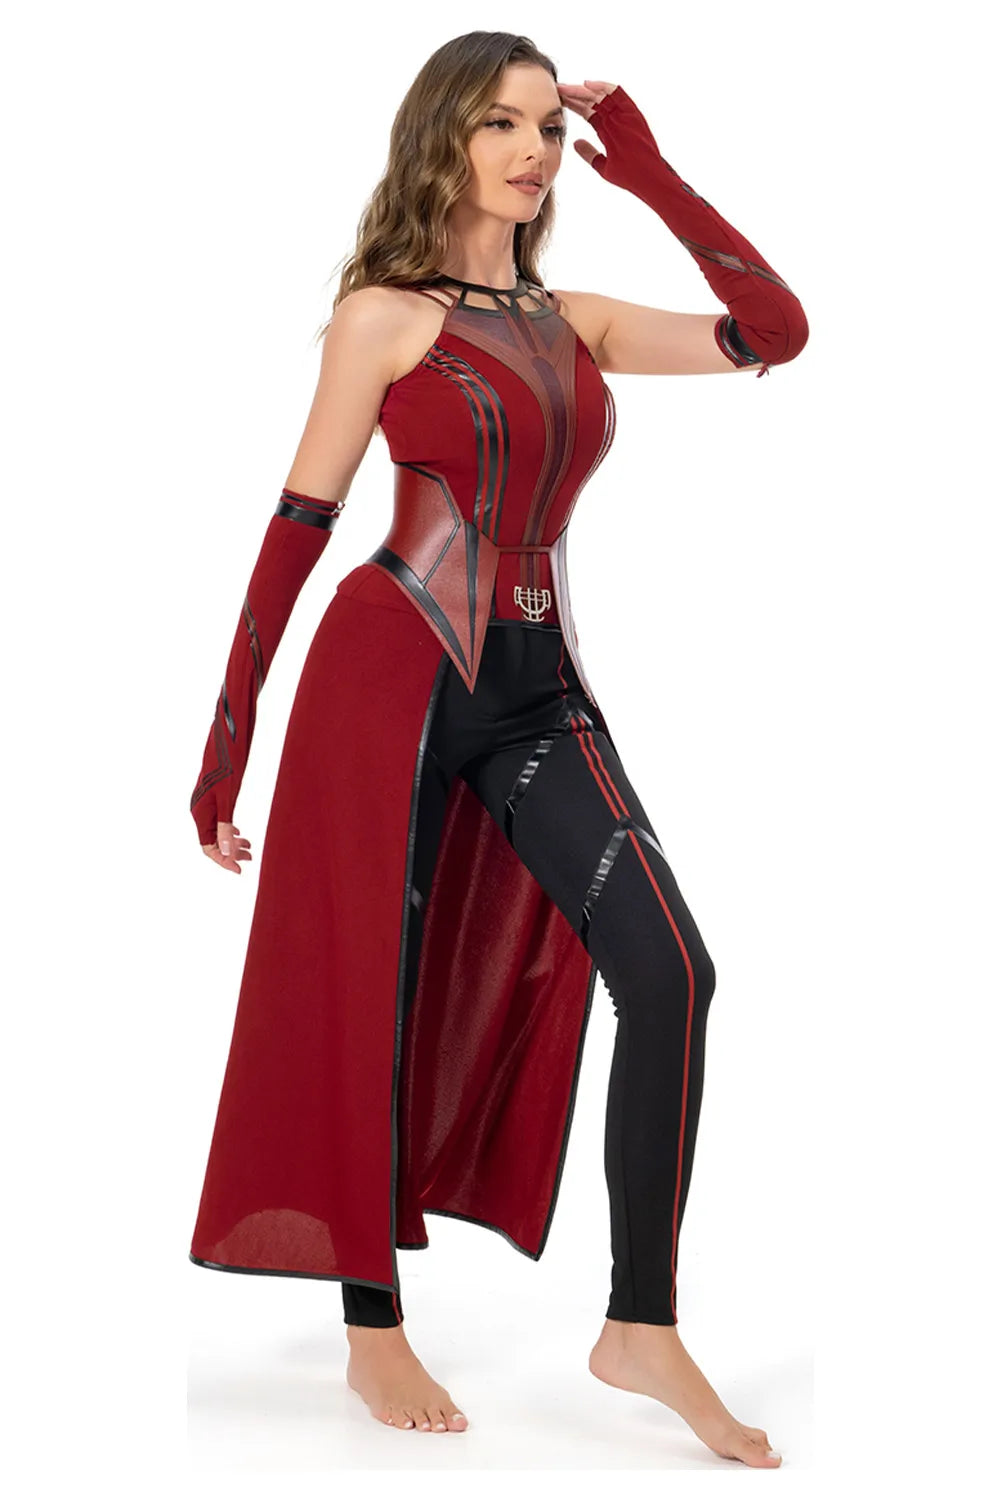 Halloween Witch Cosplay Costumes Suit Women Sleeveless Dress With Pants Belt Gloves Scarlet Color Elastic PU Leather Outfit Set